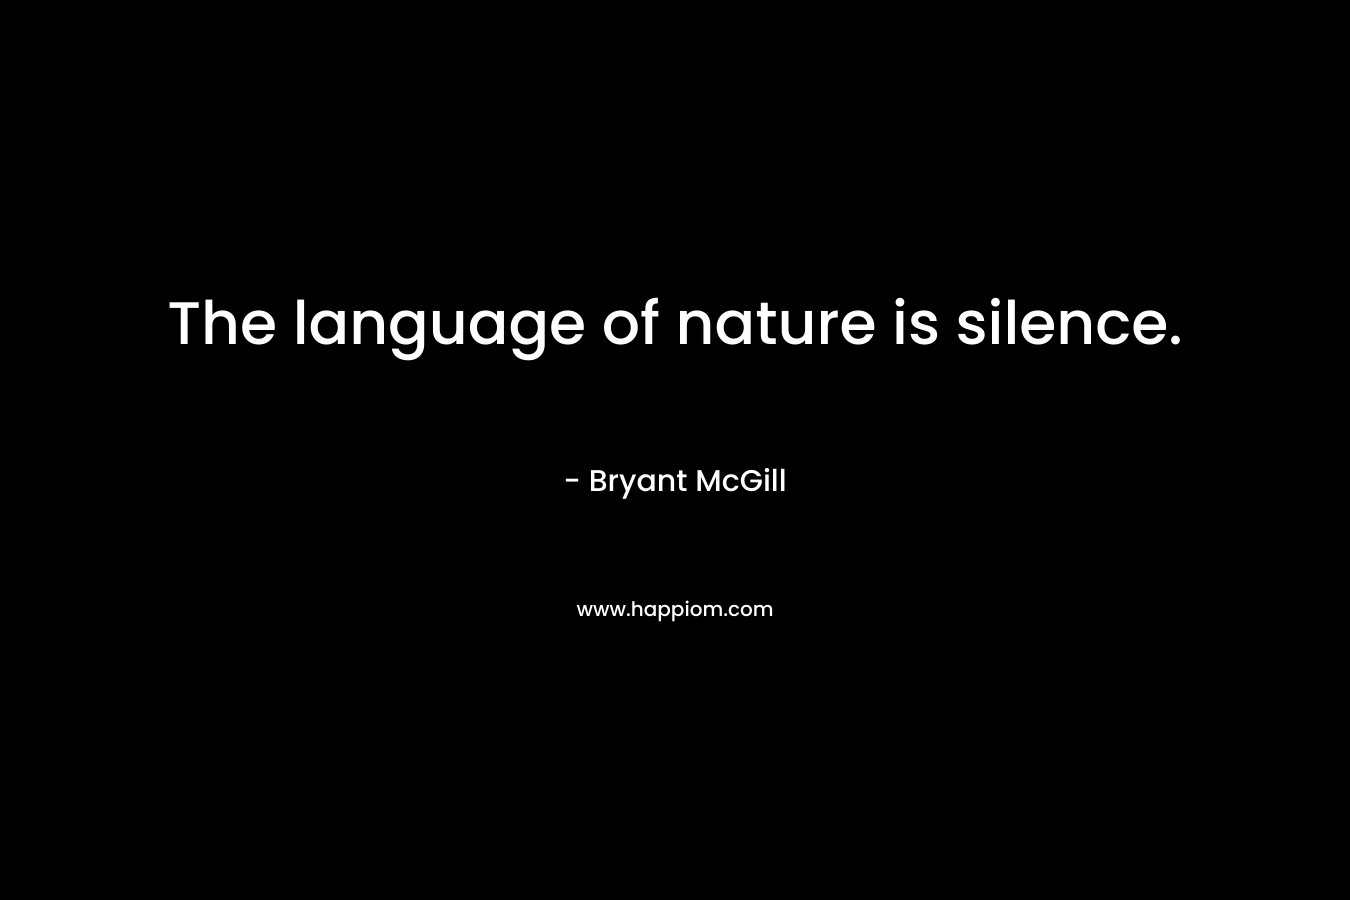 The language of nature is silence.